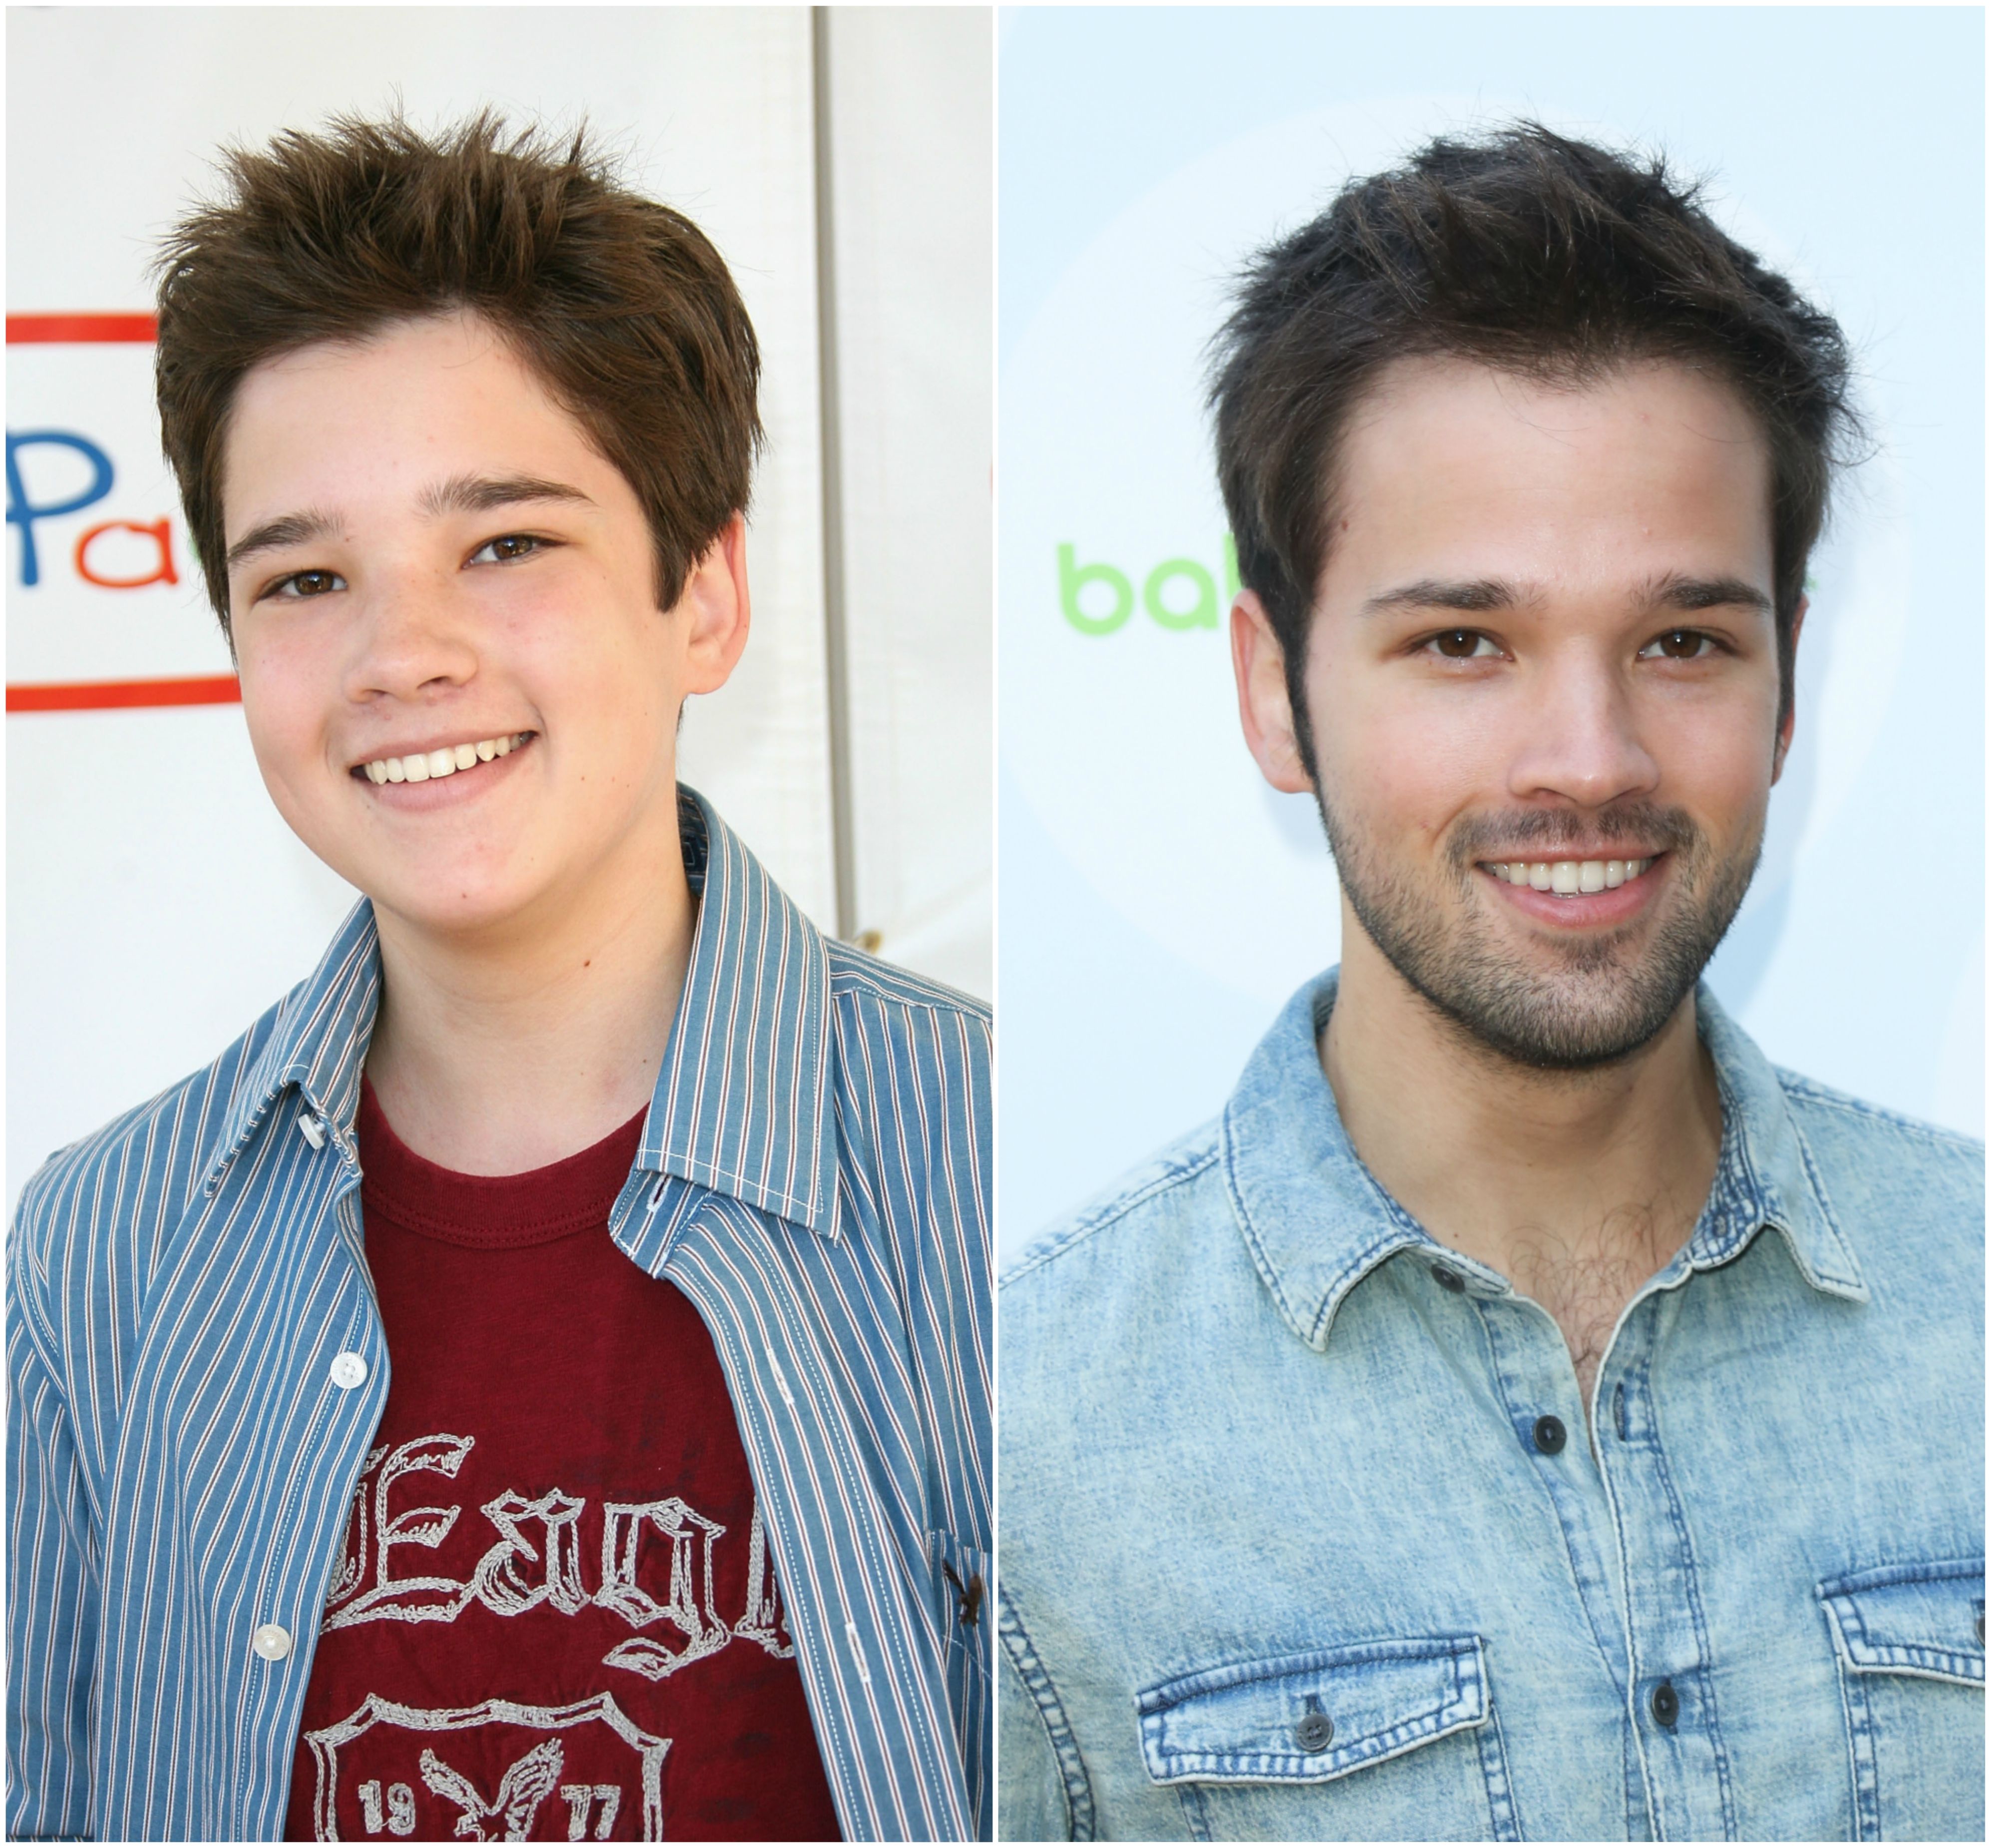 then and now nickelodeon stars